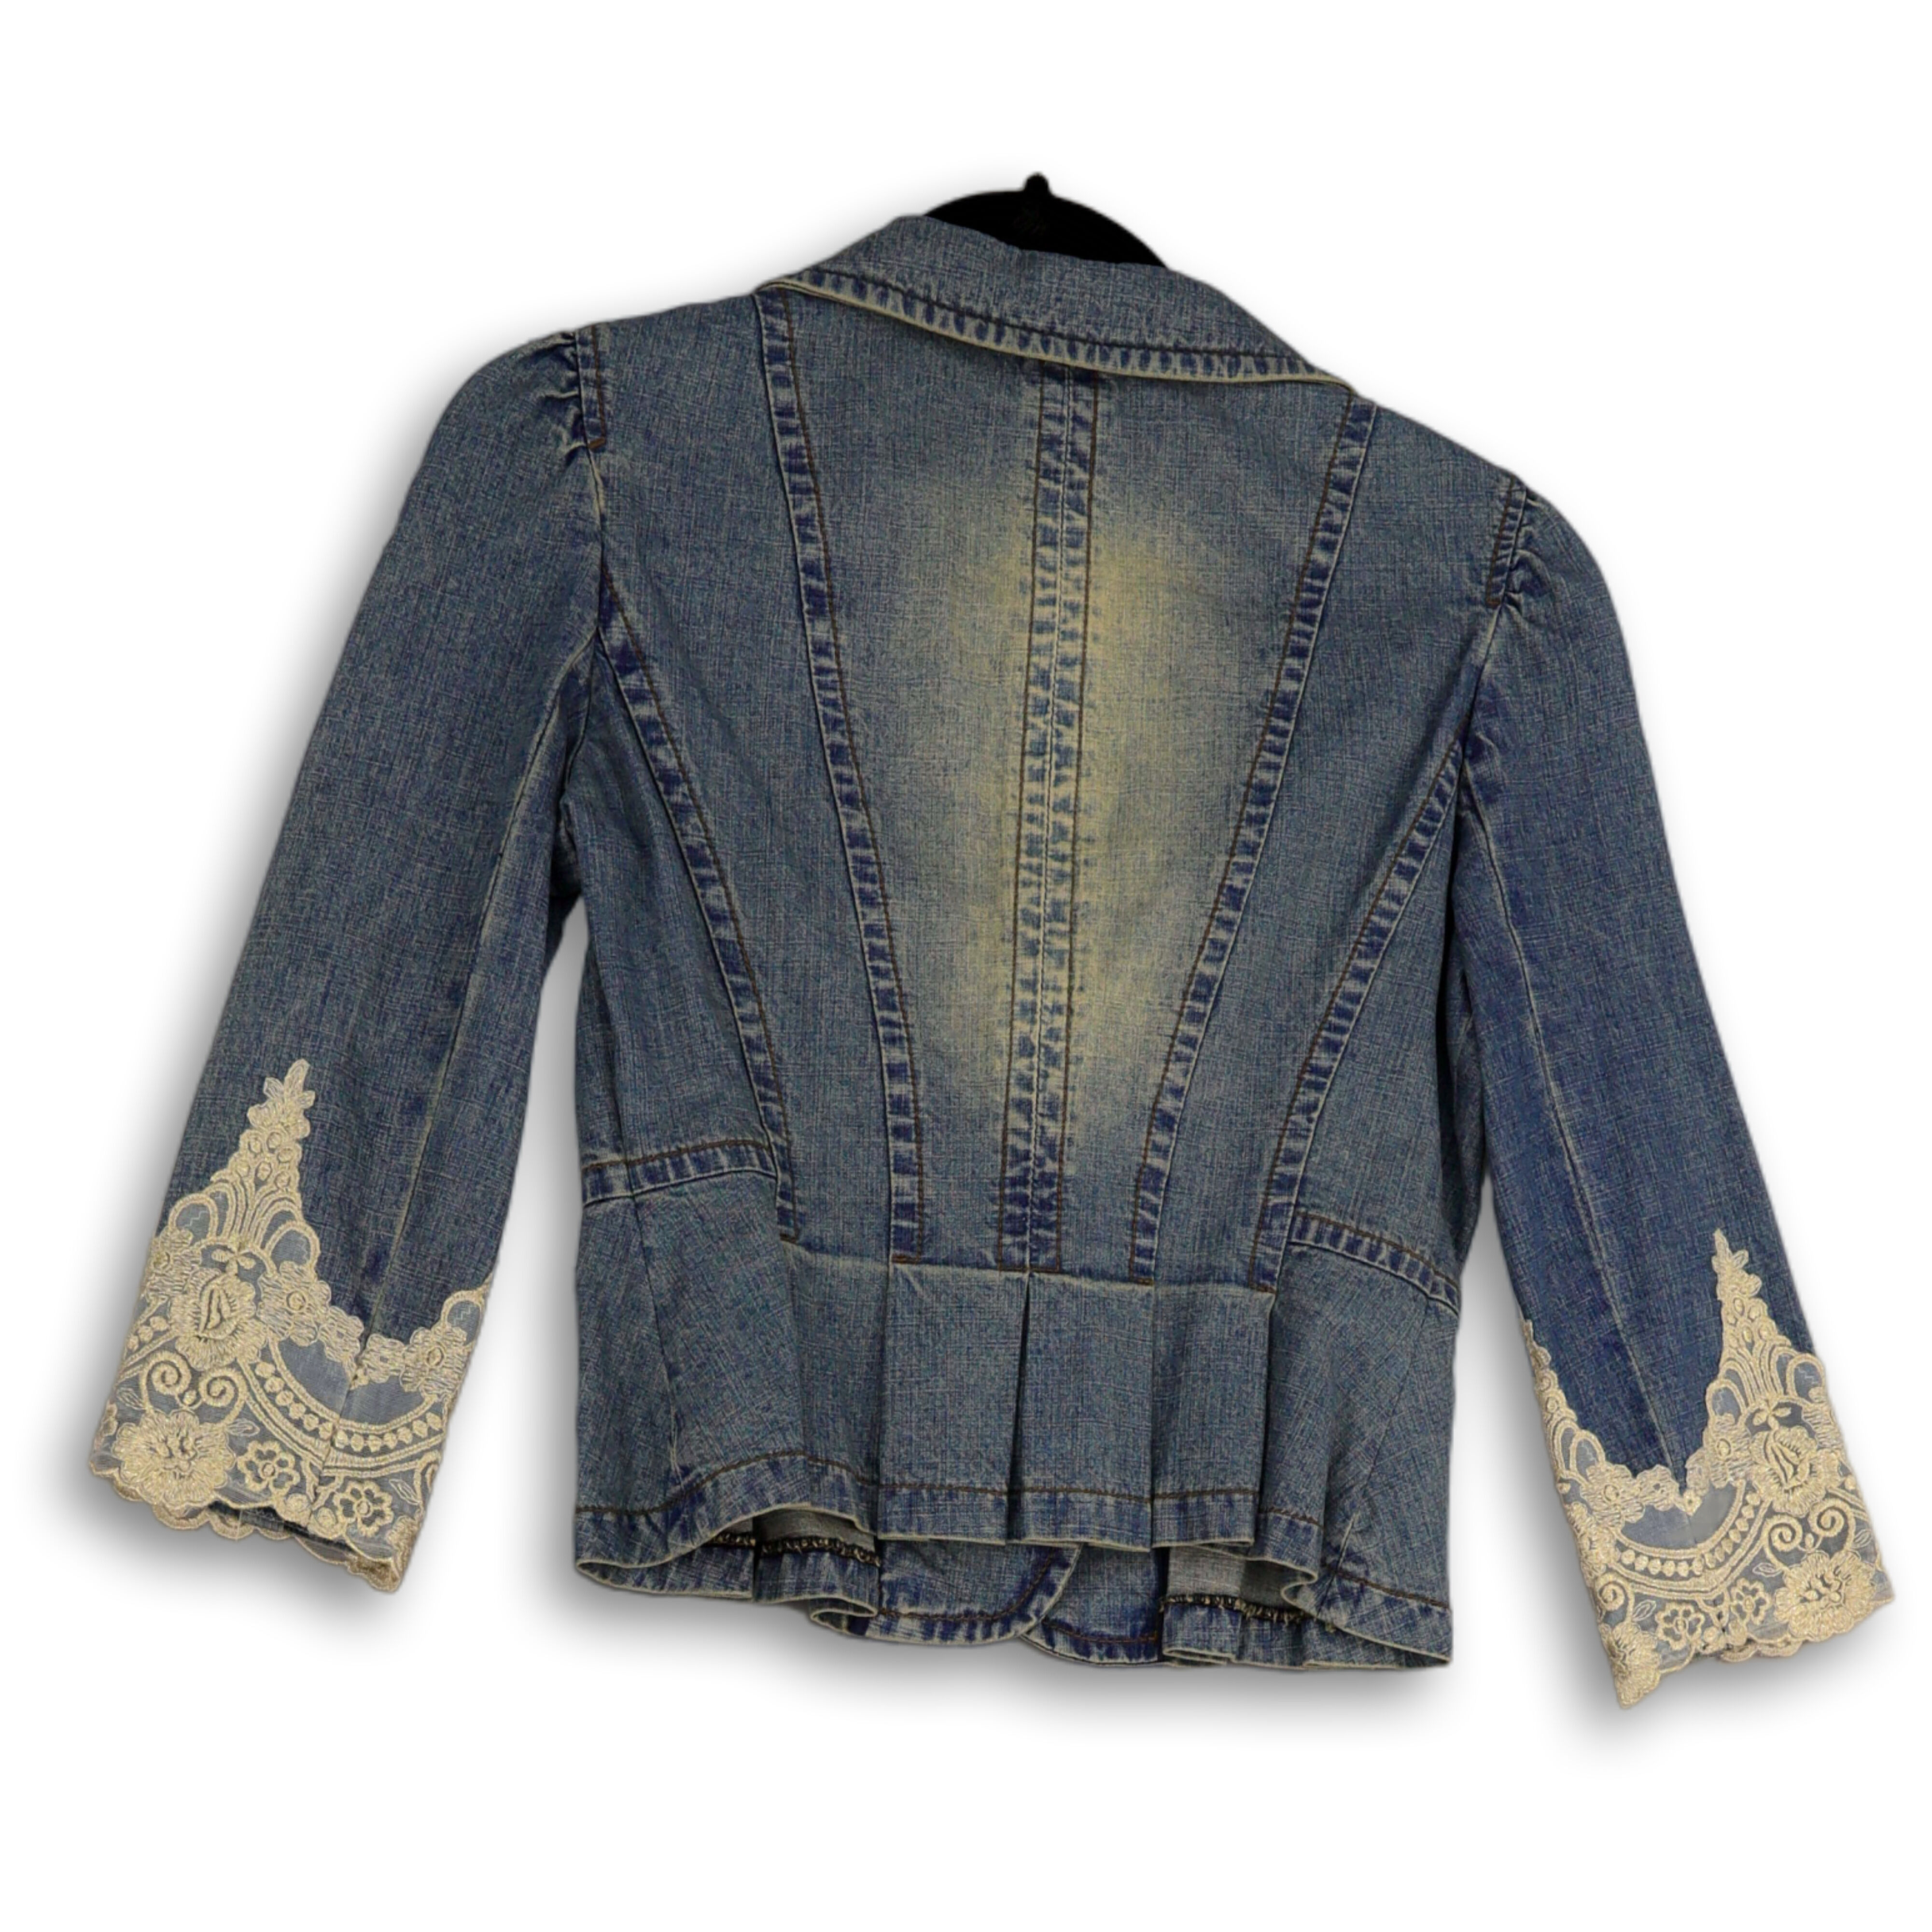 Denim jacket with lace and fringes